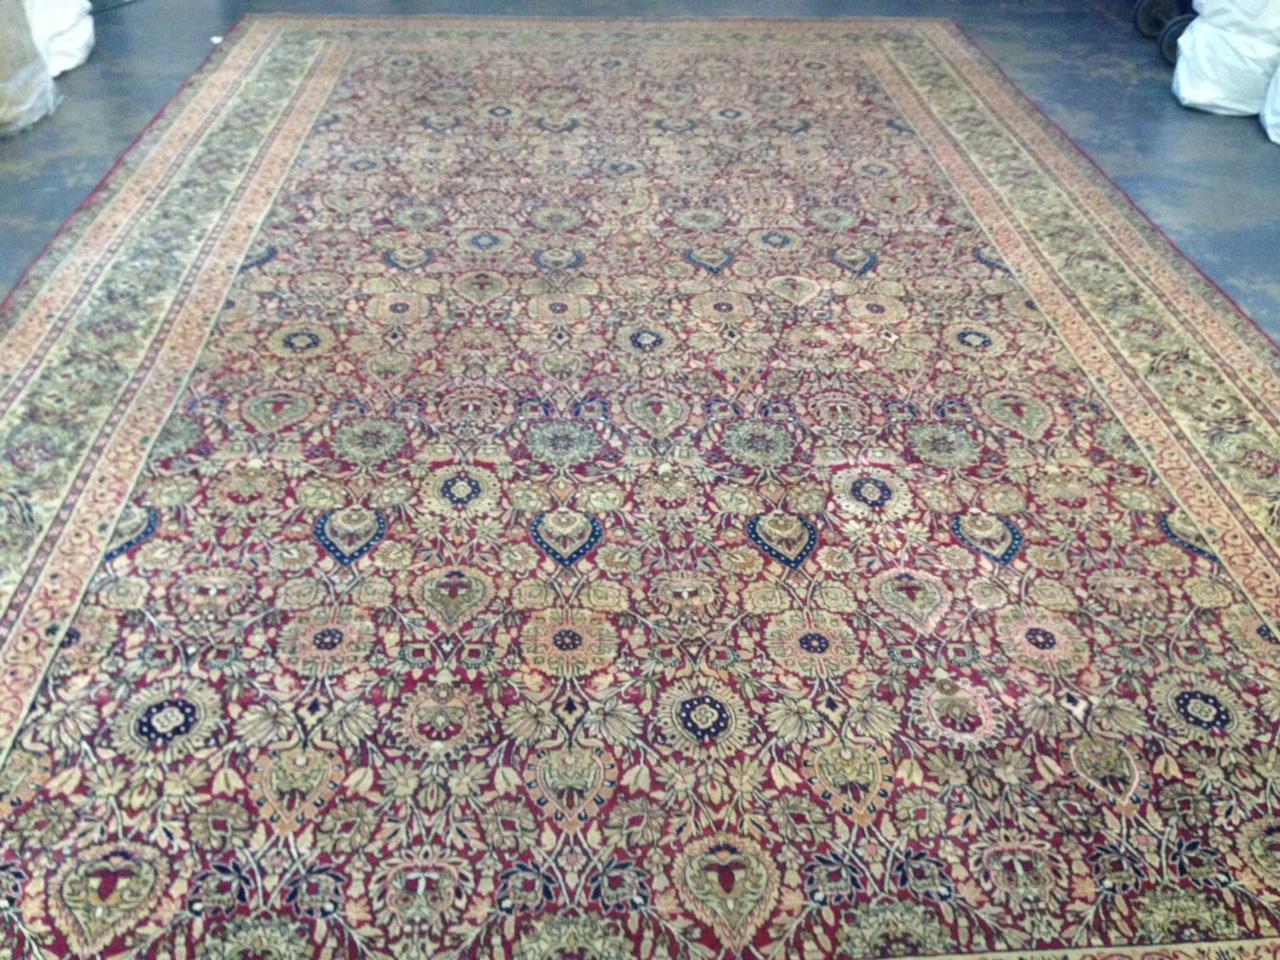 Antique Persian Floral Lavar Rug, circa 1880s-1900s In Good Condition For Sale In New York, NY